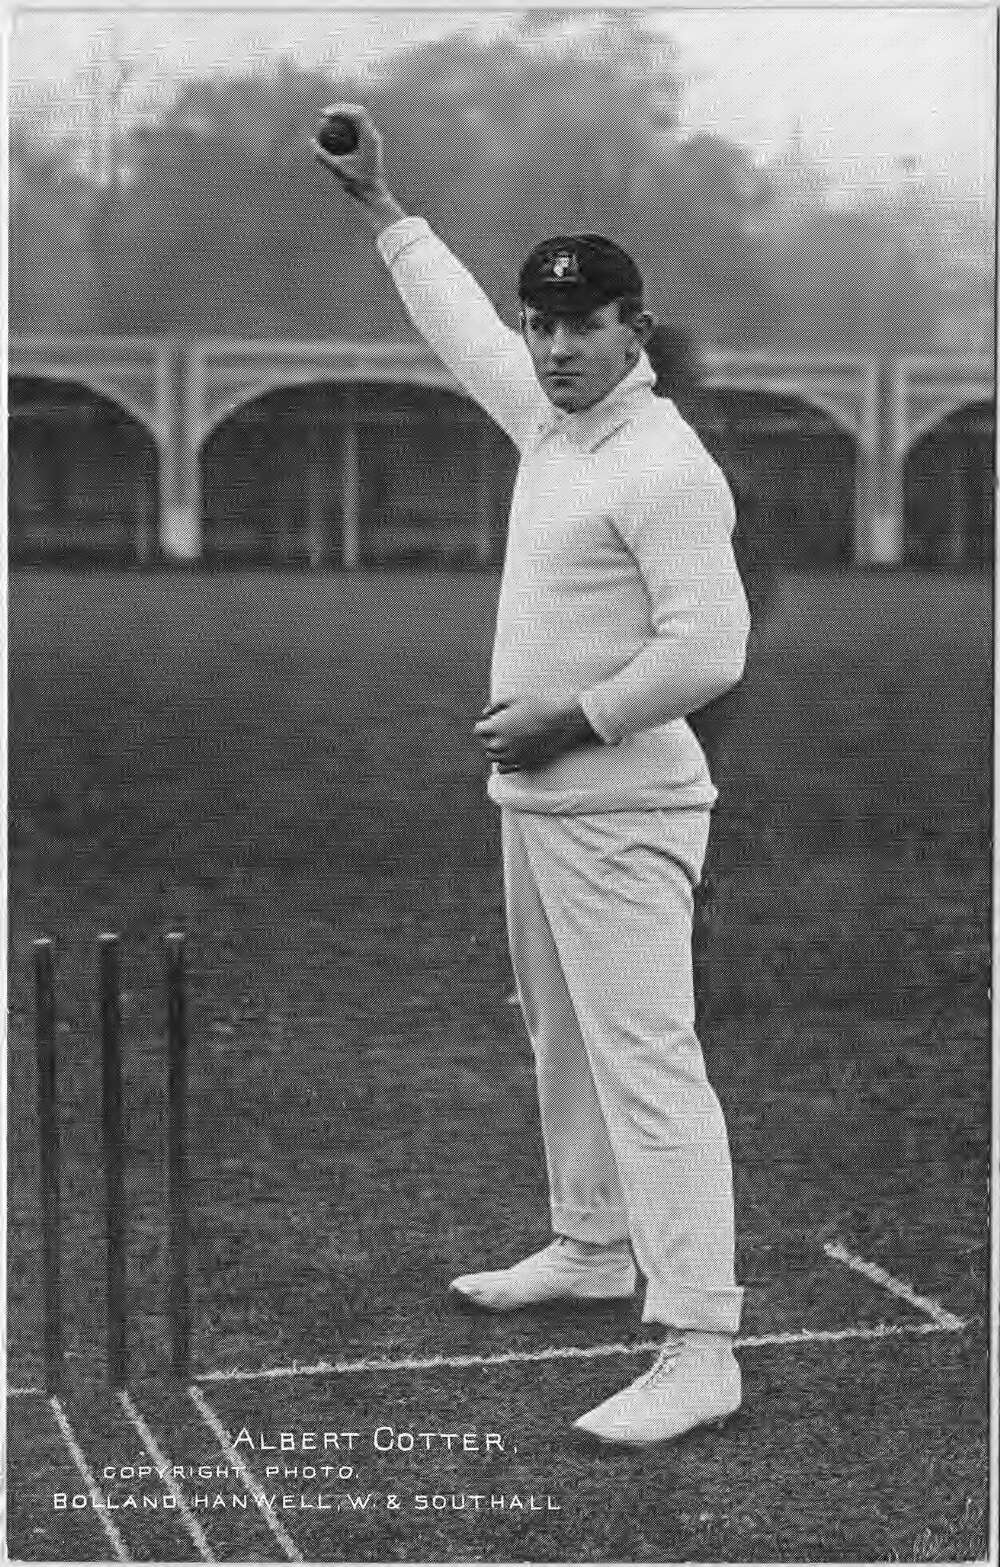 Image 5 of 6 - Tibby Cotter in all white cricket uniform, holding up a cricket ball next to cricket stumps.